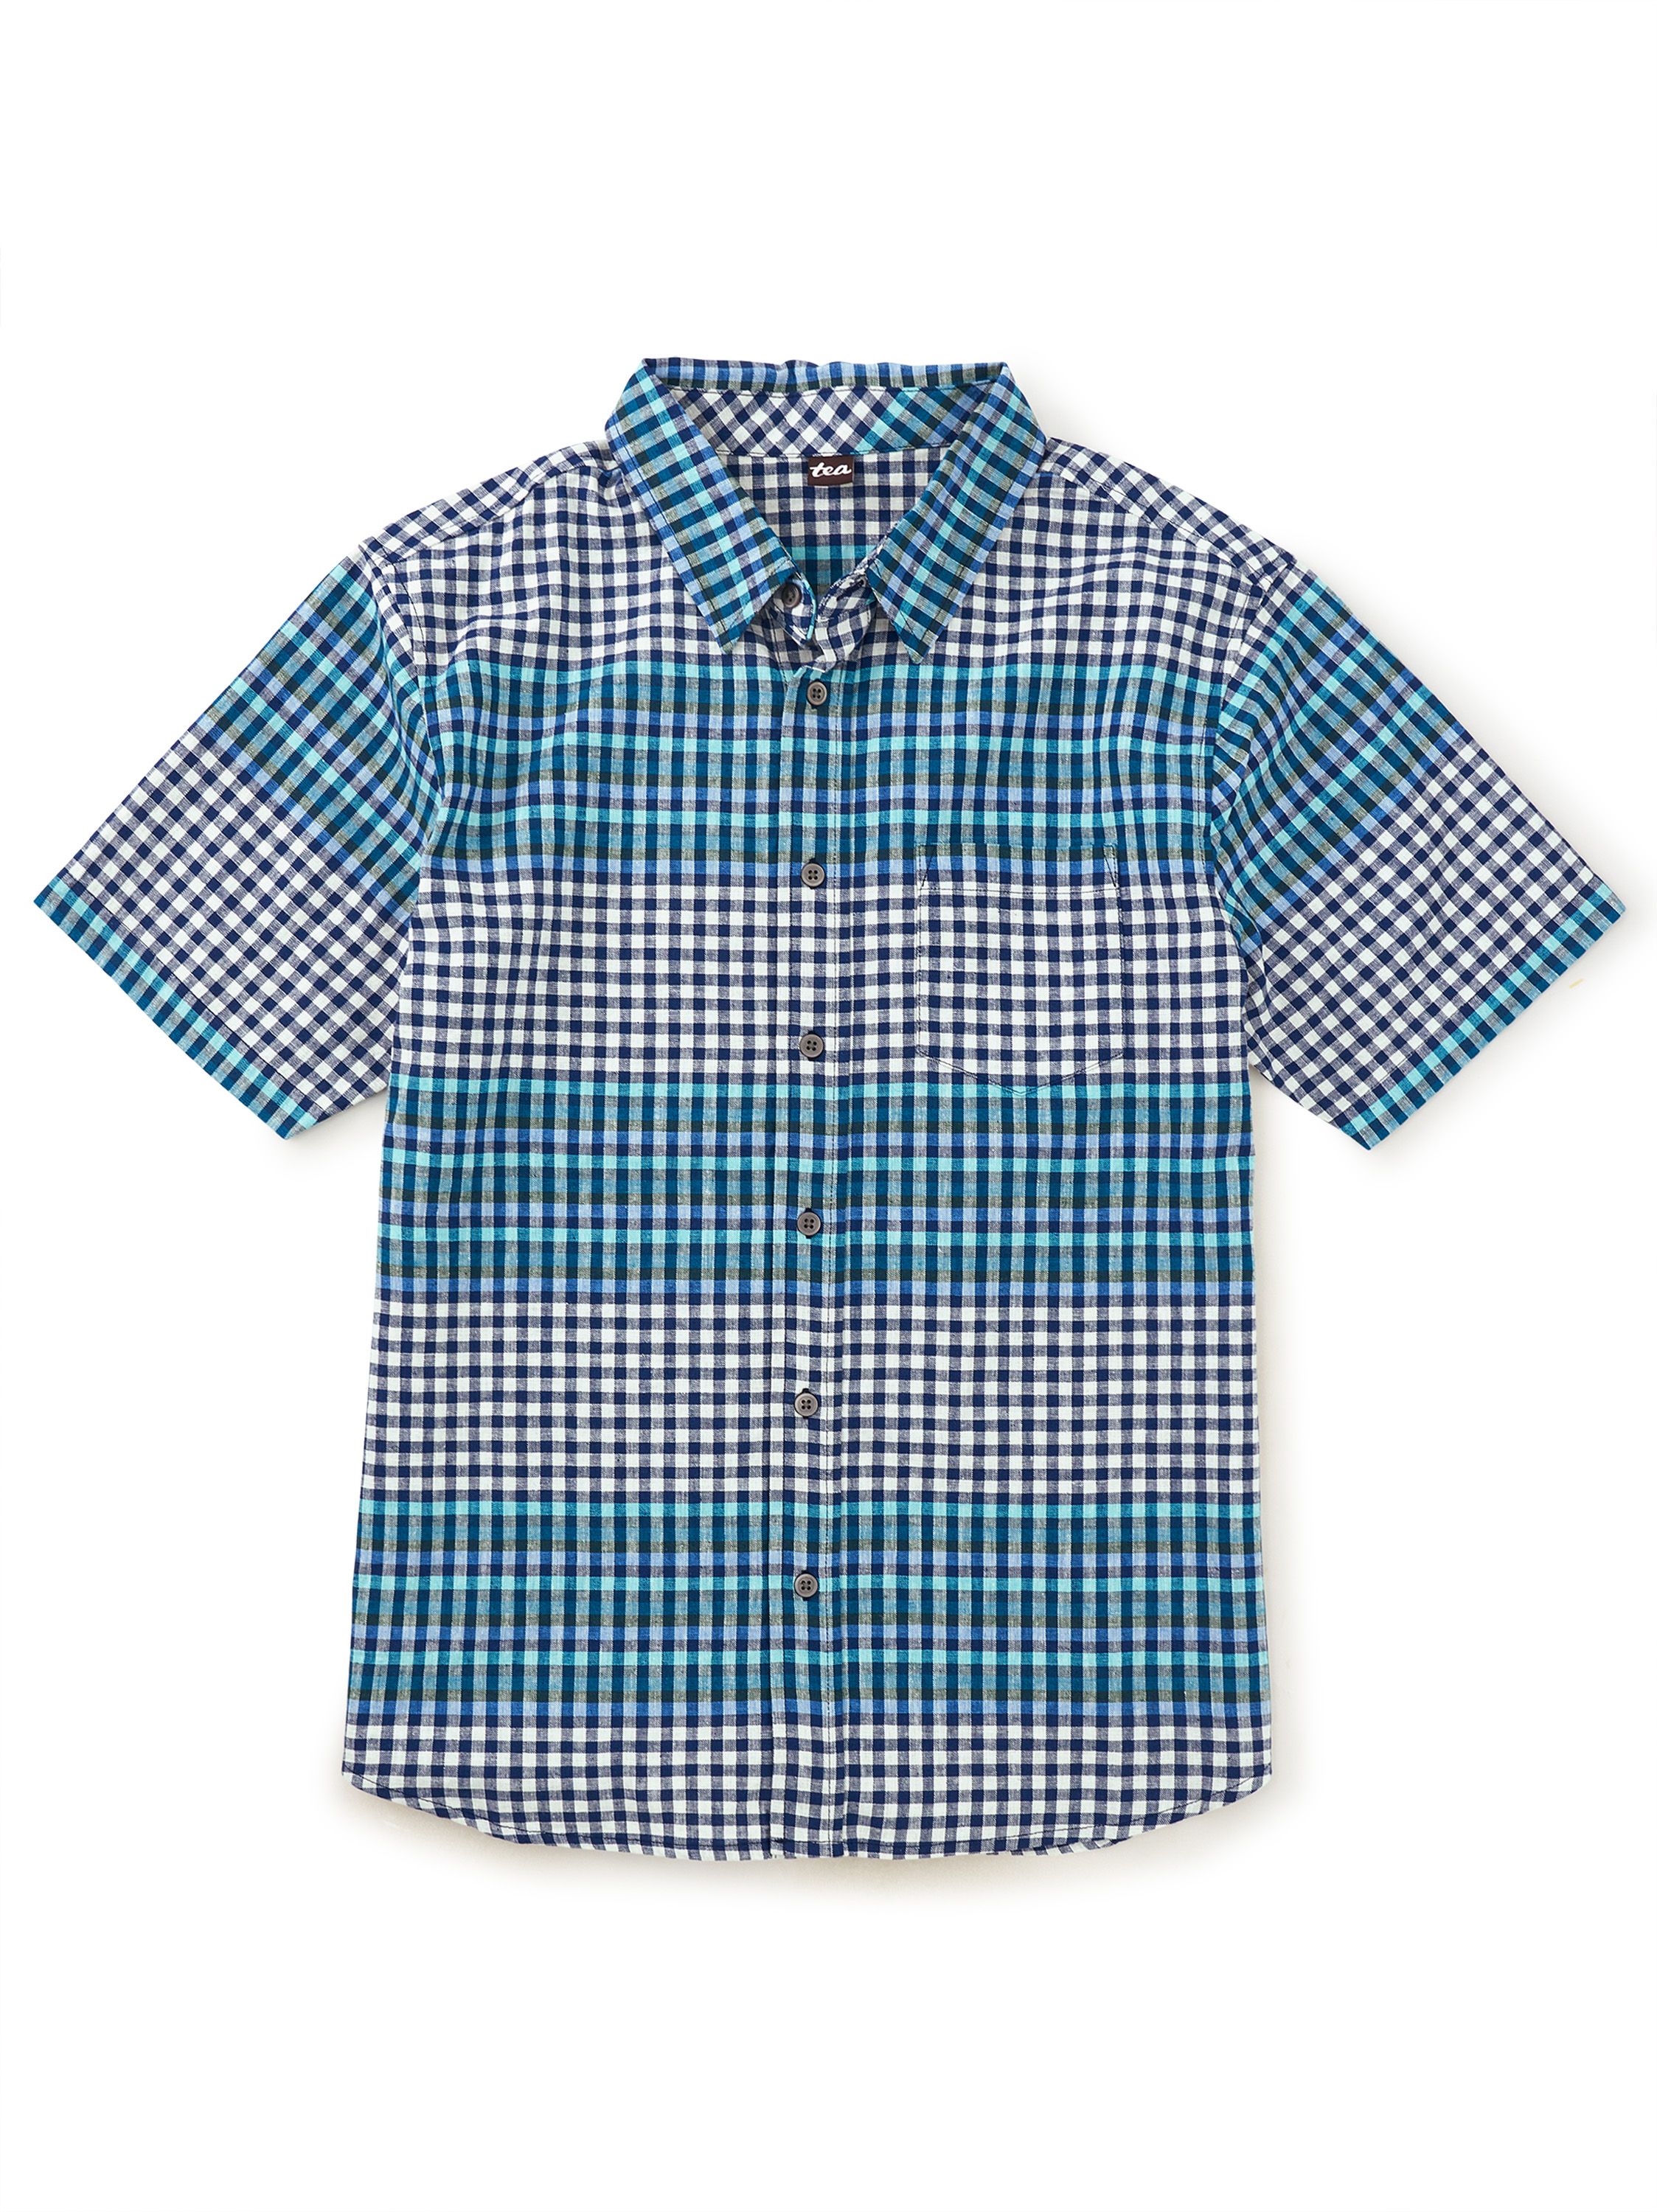 Adult Button-Up Woven Shirt | Tea Collection